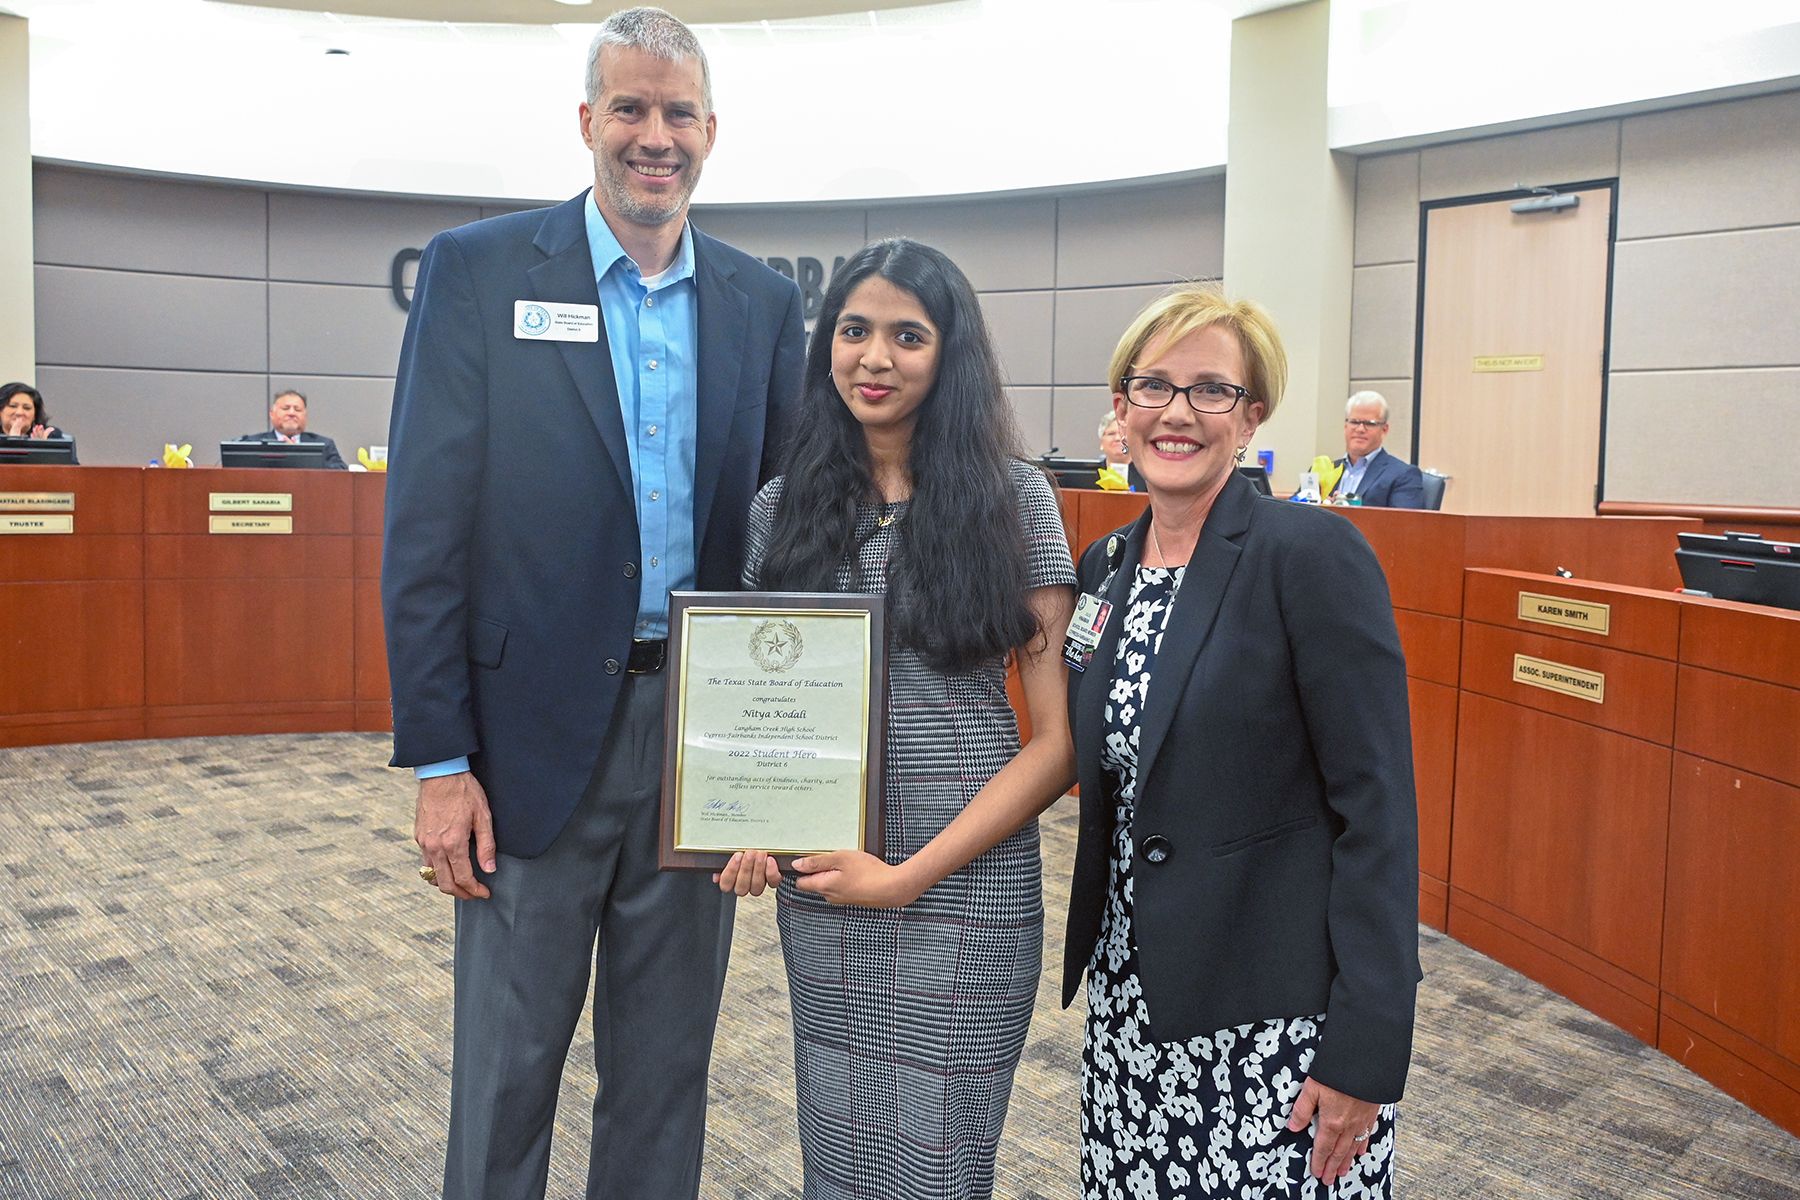 Langham Creek Senior Earns Student Heroes Award for Act of Kindness